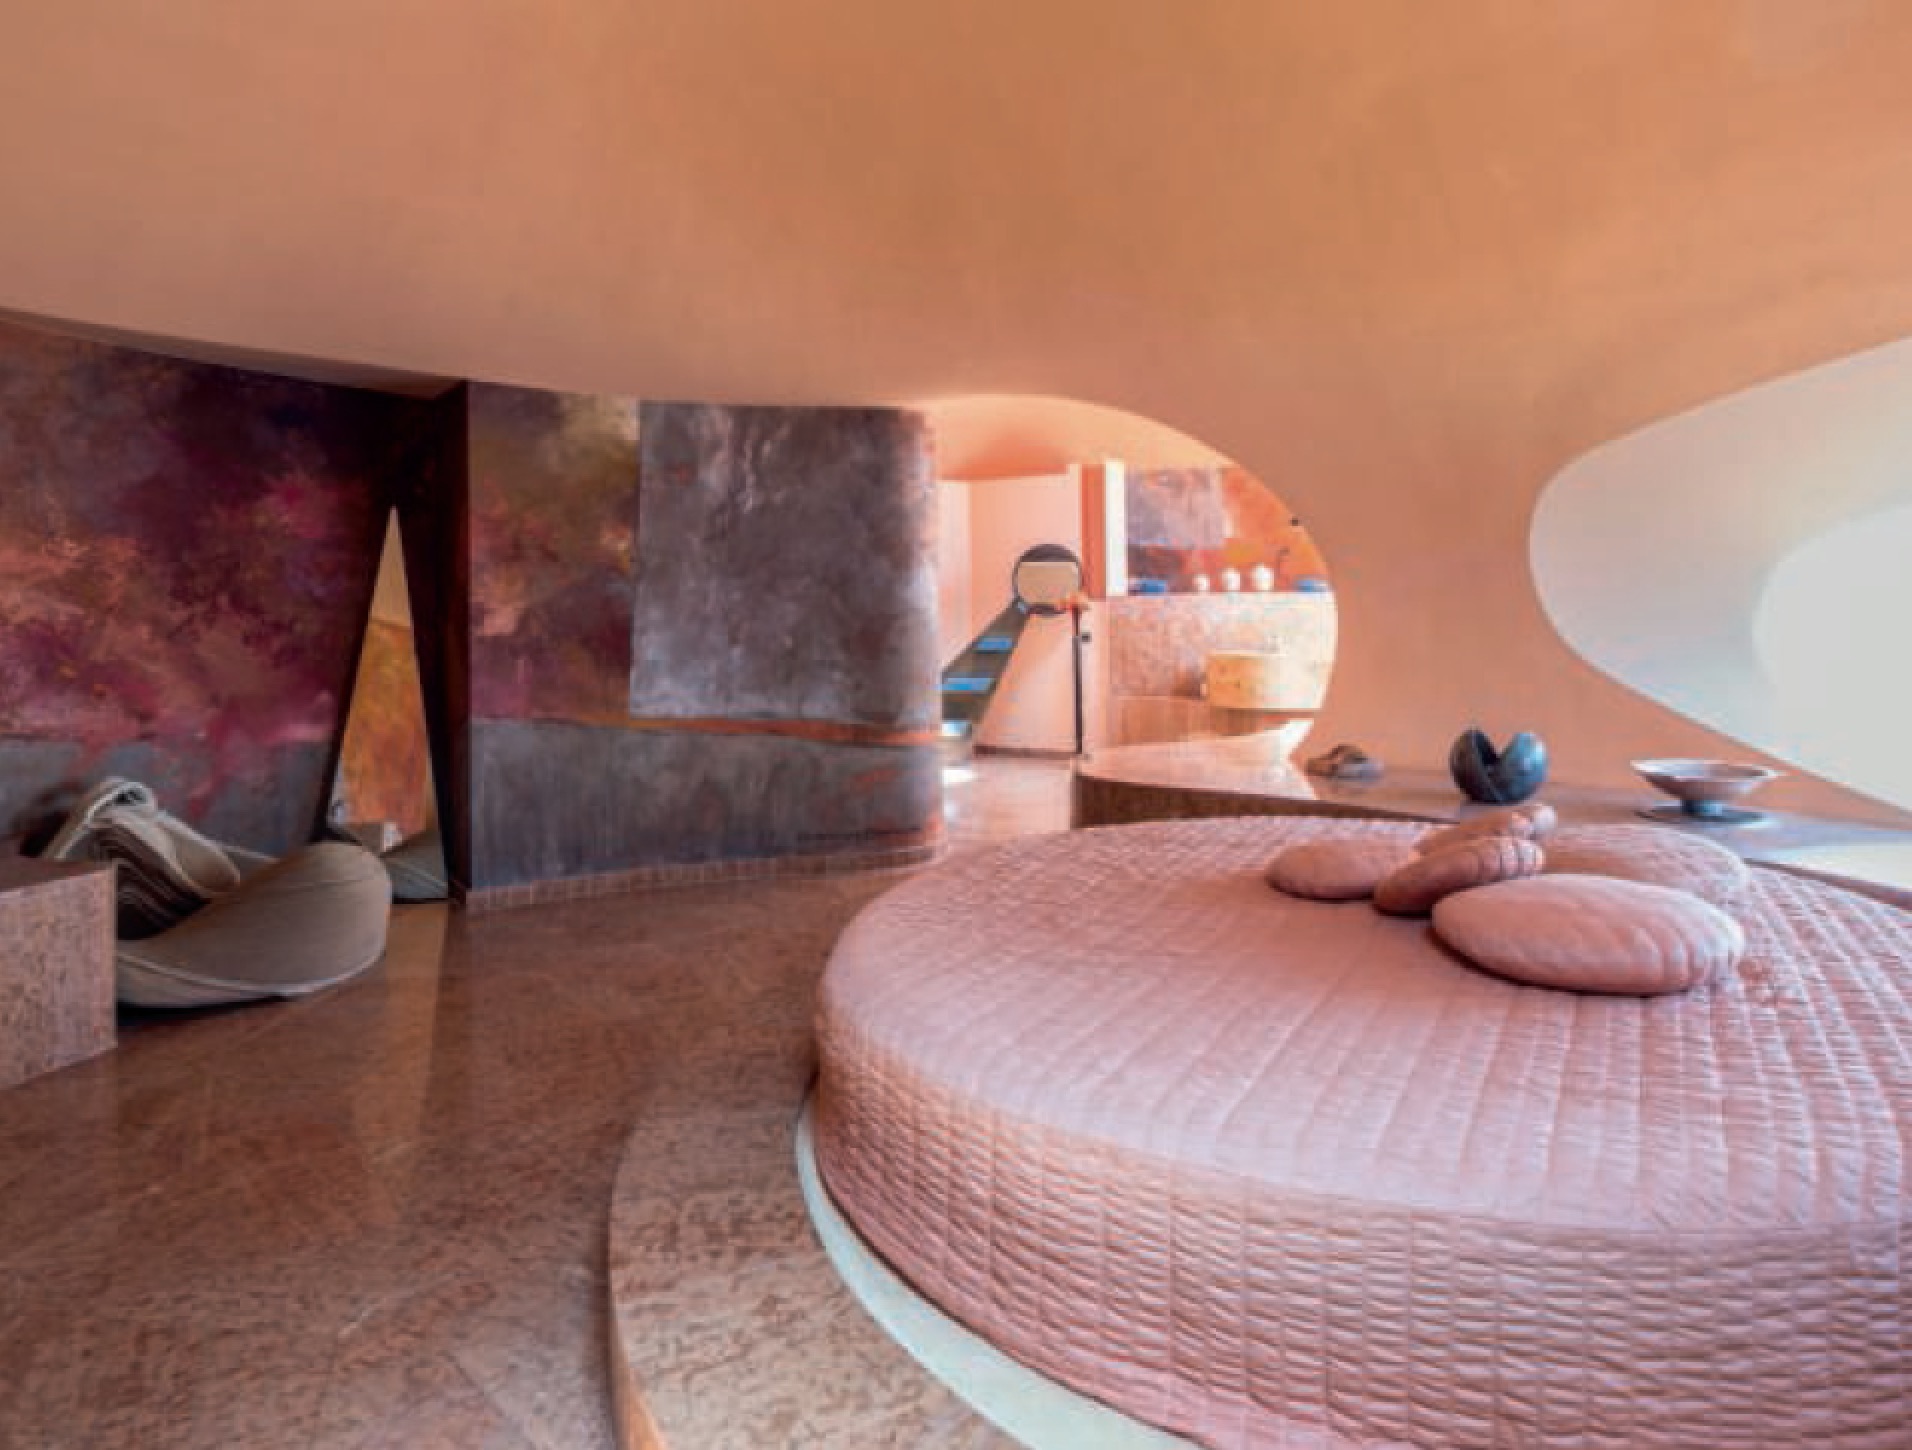 Palais Bulles Designers Antti Lovag & Pierre Cardin Bedroom, Cote d’Azur, France Completed 1992 - as featured in Interiors: The Greatest Rooms of the Century